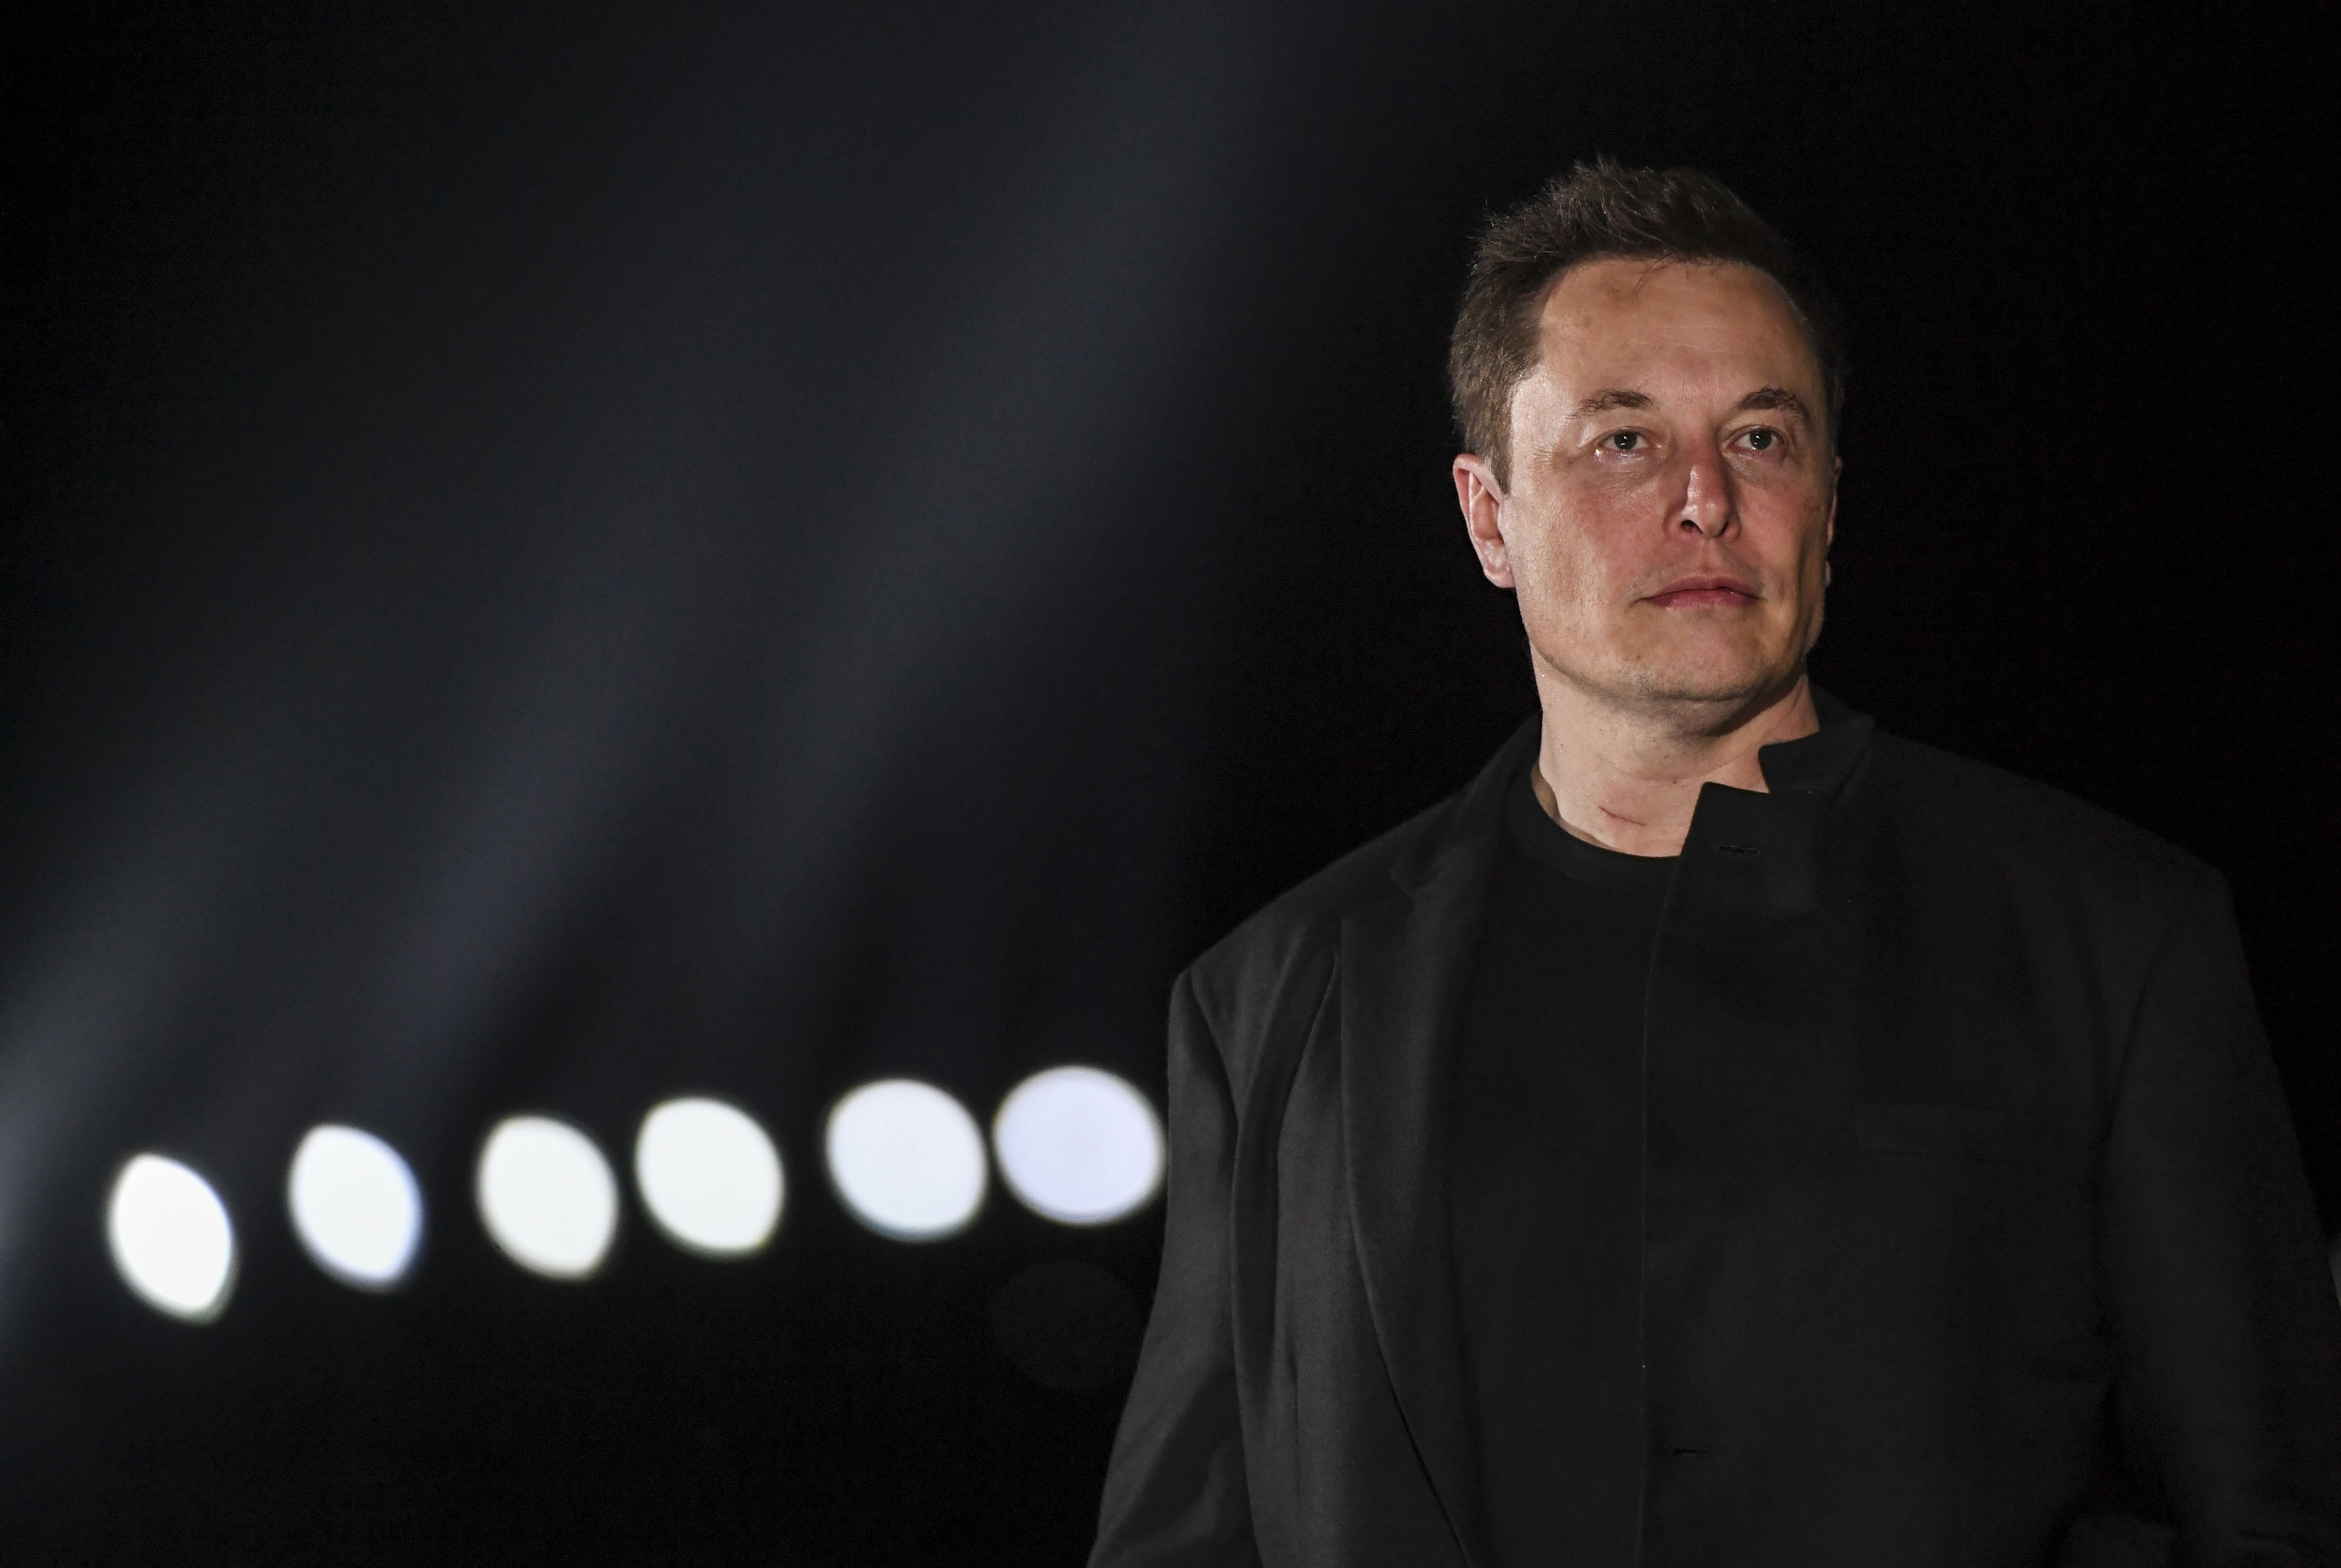 Texan of the Year finalist Elon Musk invests in Texas while reaching for  the stars